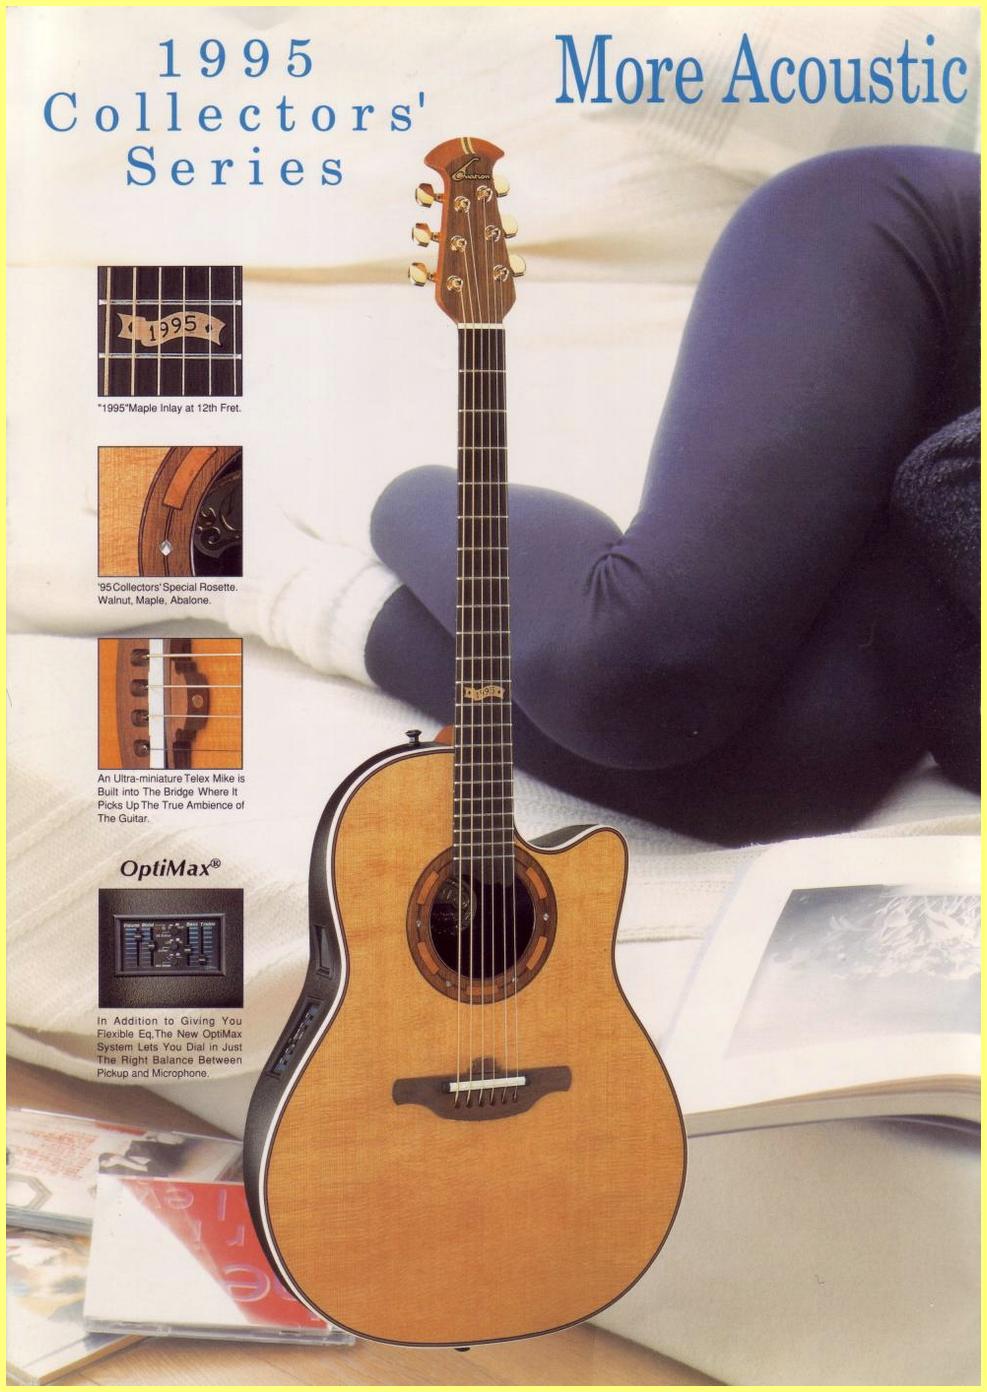 Ovation 1995 Collector's Model Japanese Brochure